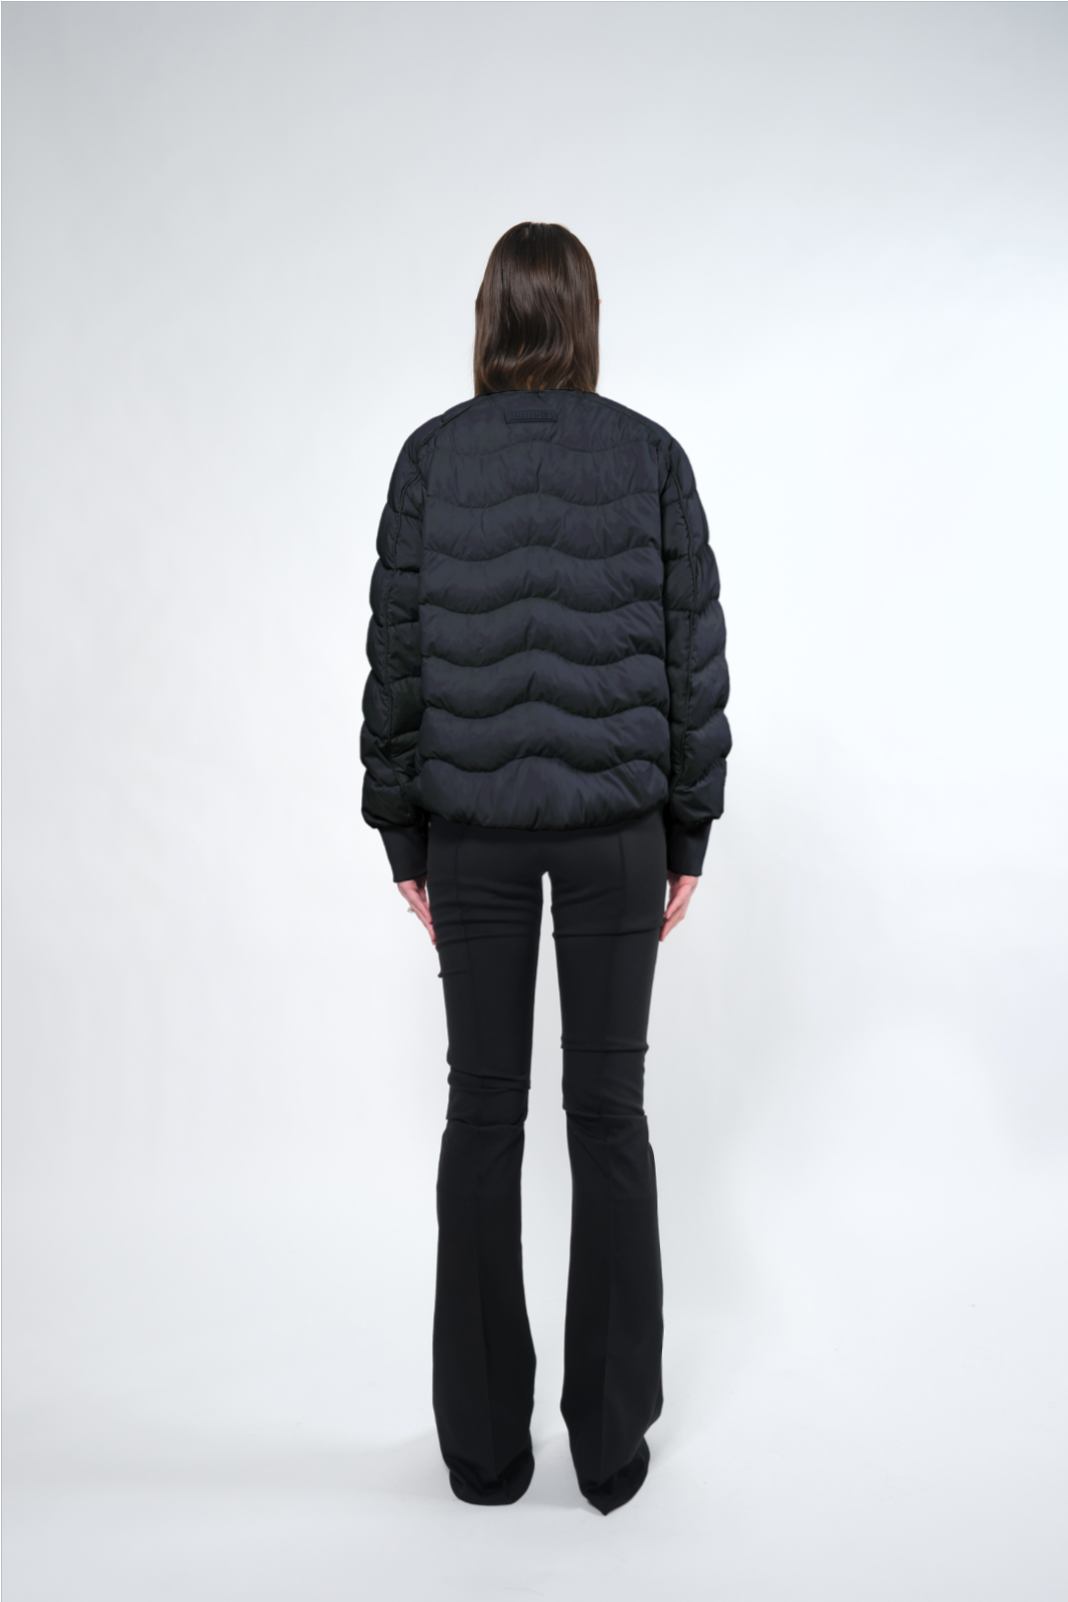  Re:Down® Black Light Puffer Jacket - Adhere To  - 4